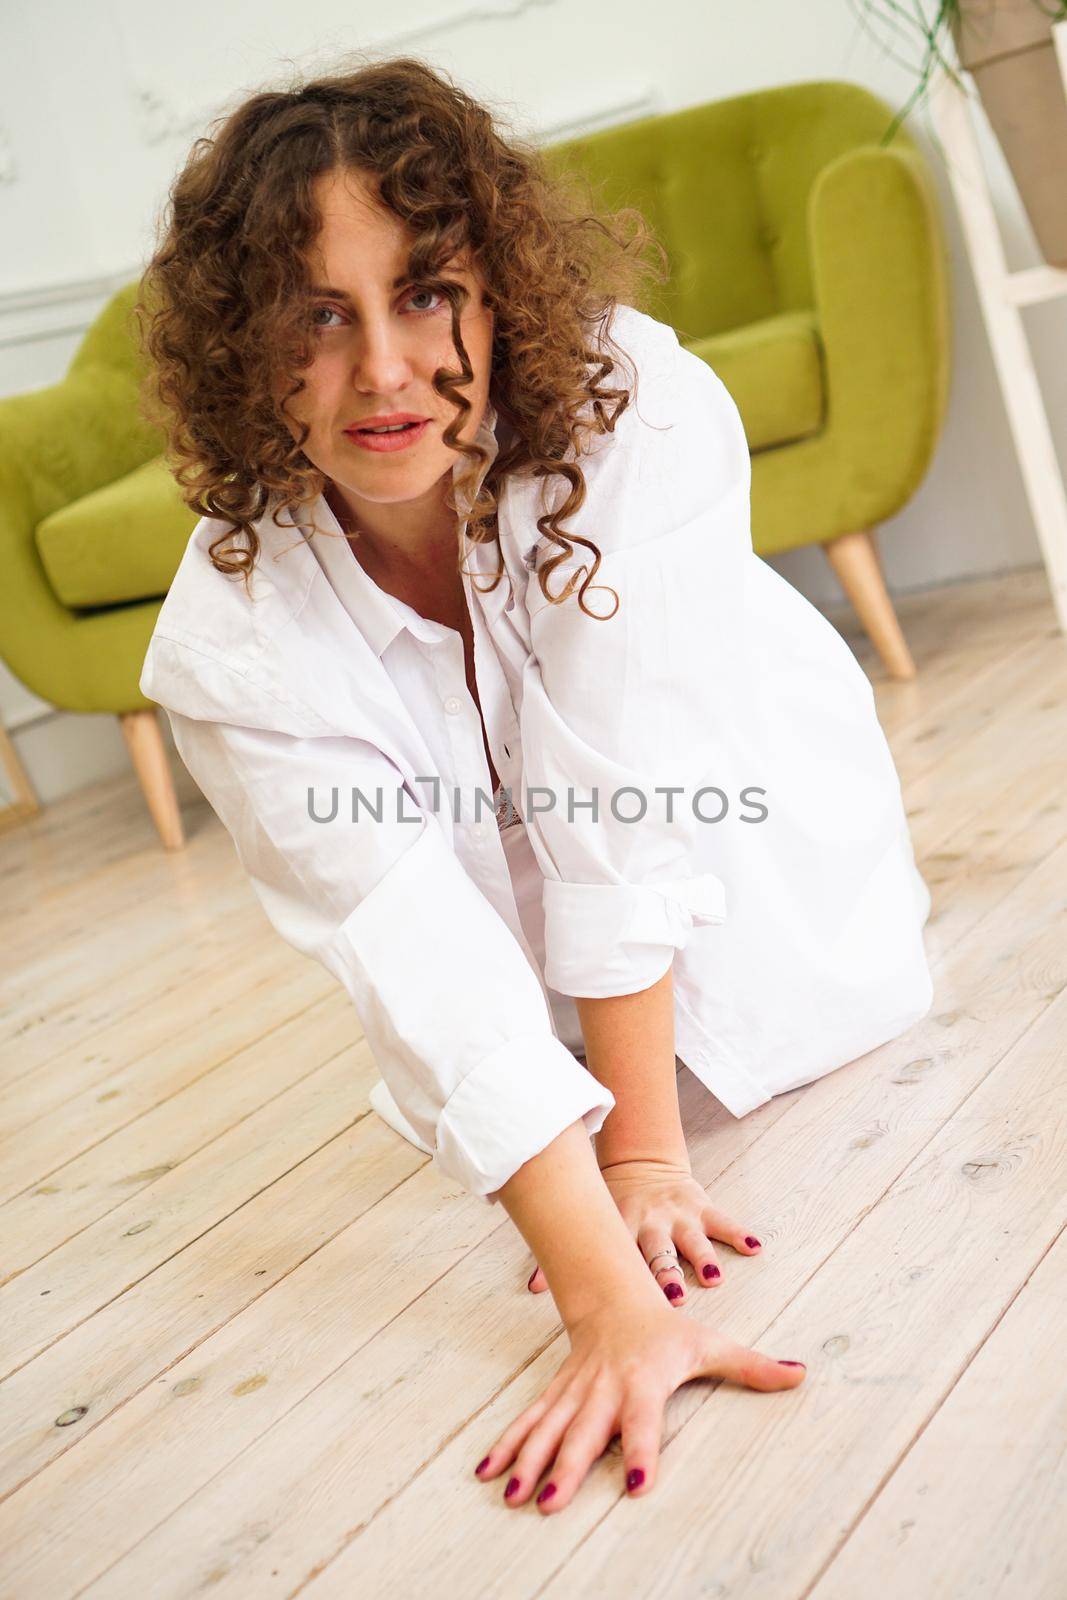 Sexy woman in white shirt on wooden floor - Portrait of pretty middle-aged woman with curly hair at home - light room.